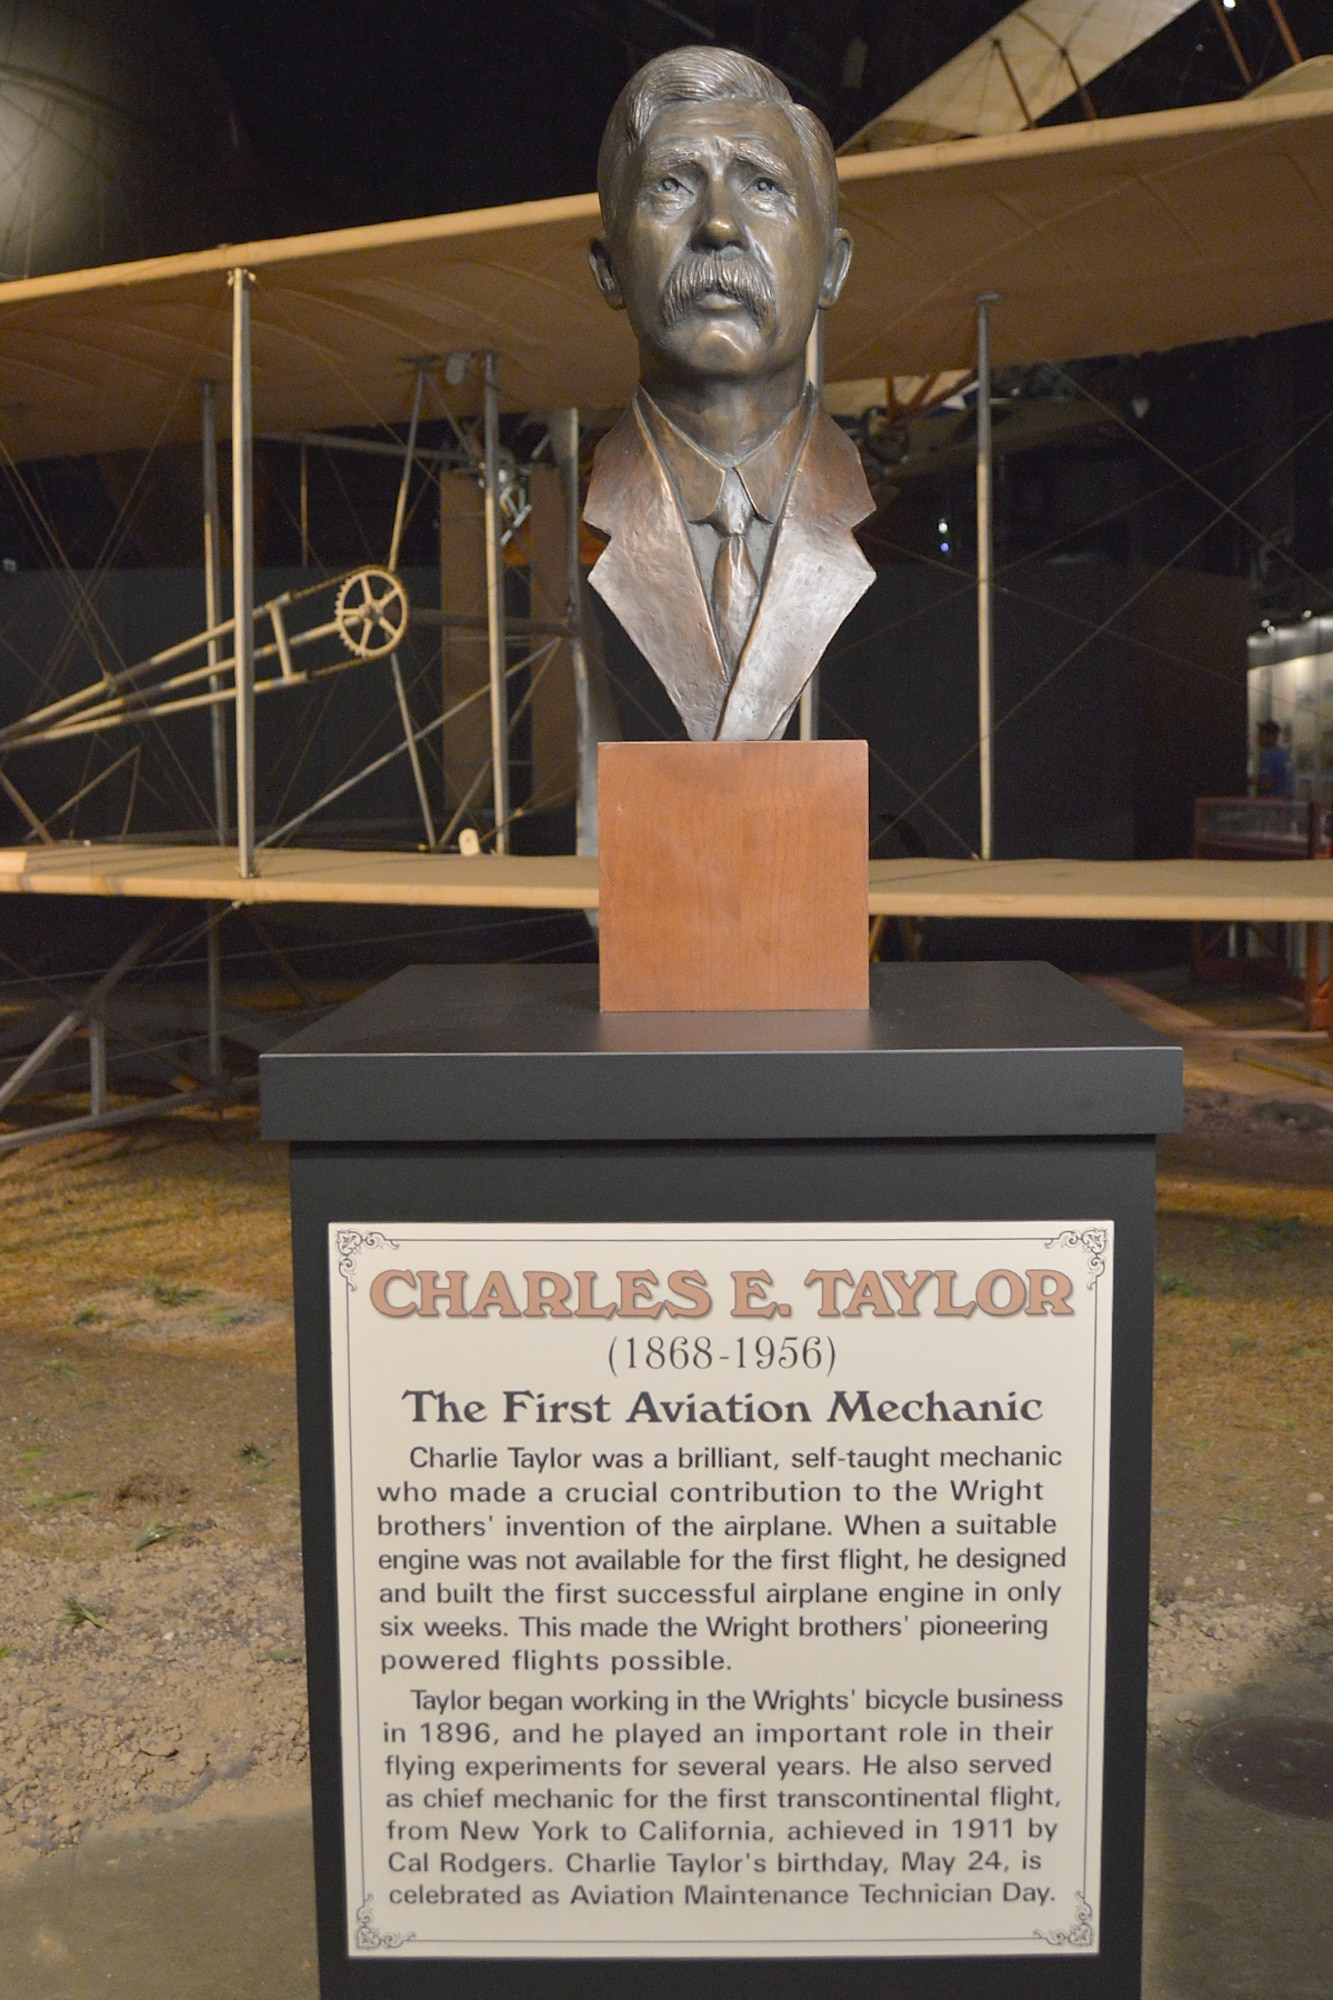 Dayton, Ohio - A bronze bust honoring the first aviation mechanic, Charles E. Taylor, is now on permanent display in the National Museum of the U.S. Air Force's Early Years Gallery. (U.S. Air Force photo by Ken LaRock)